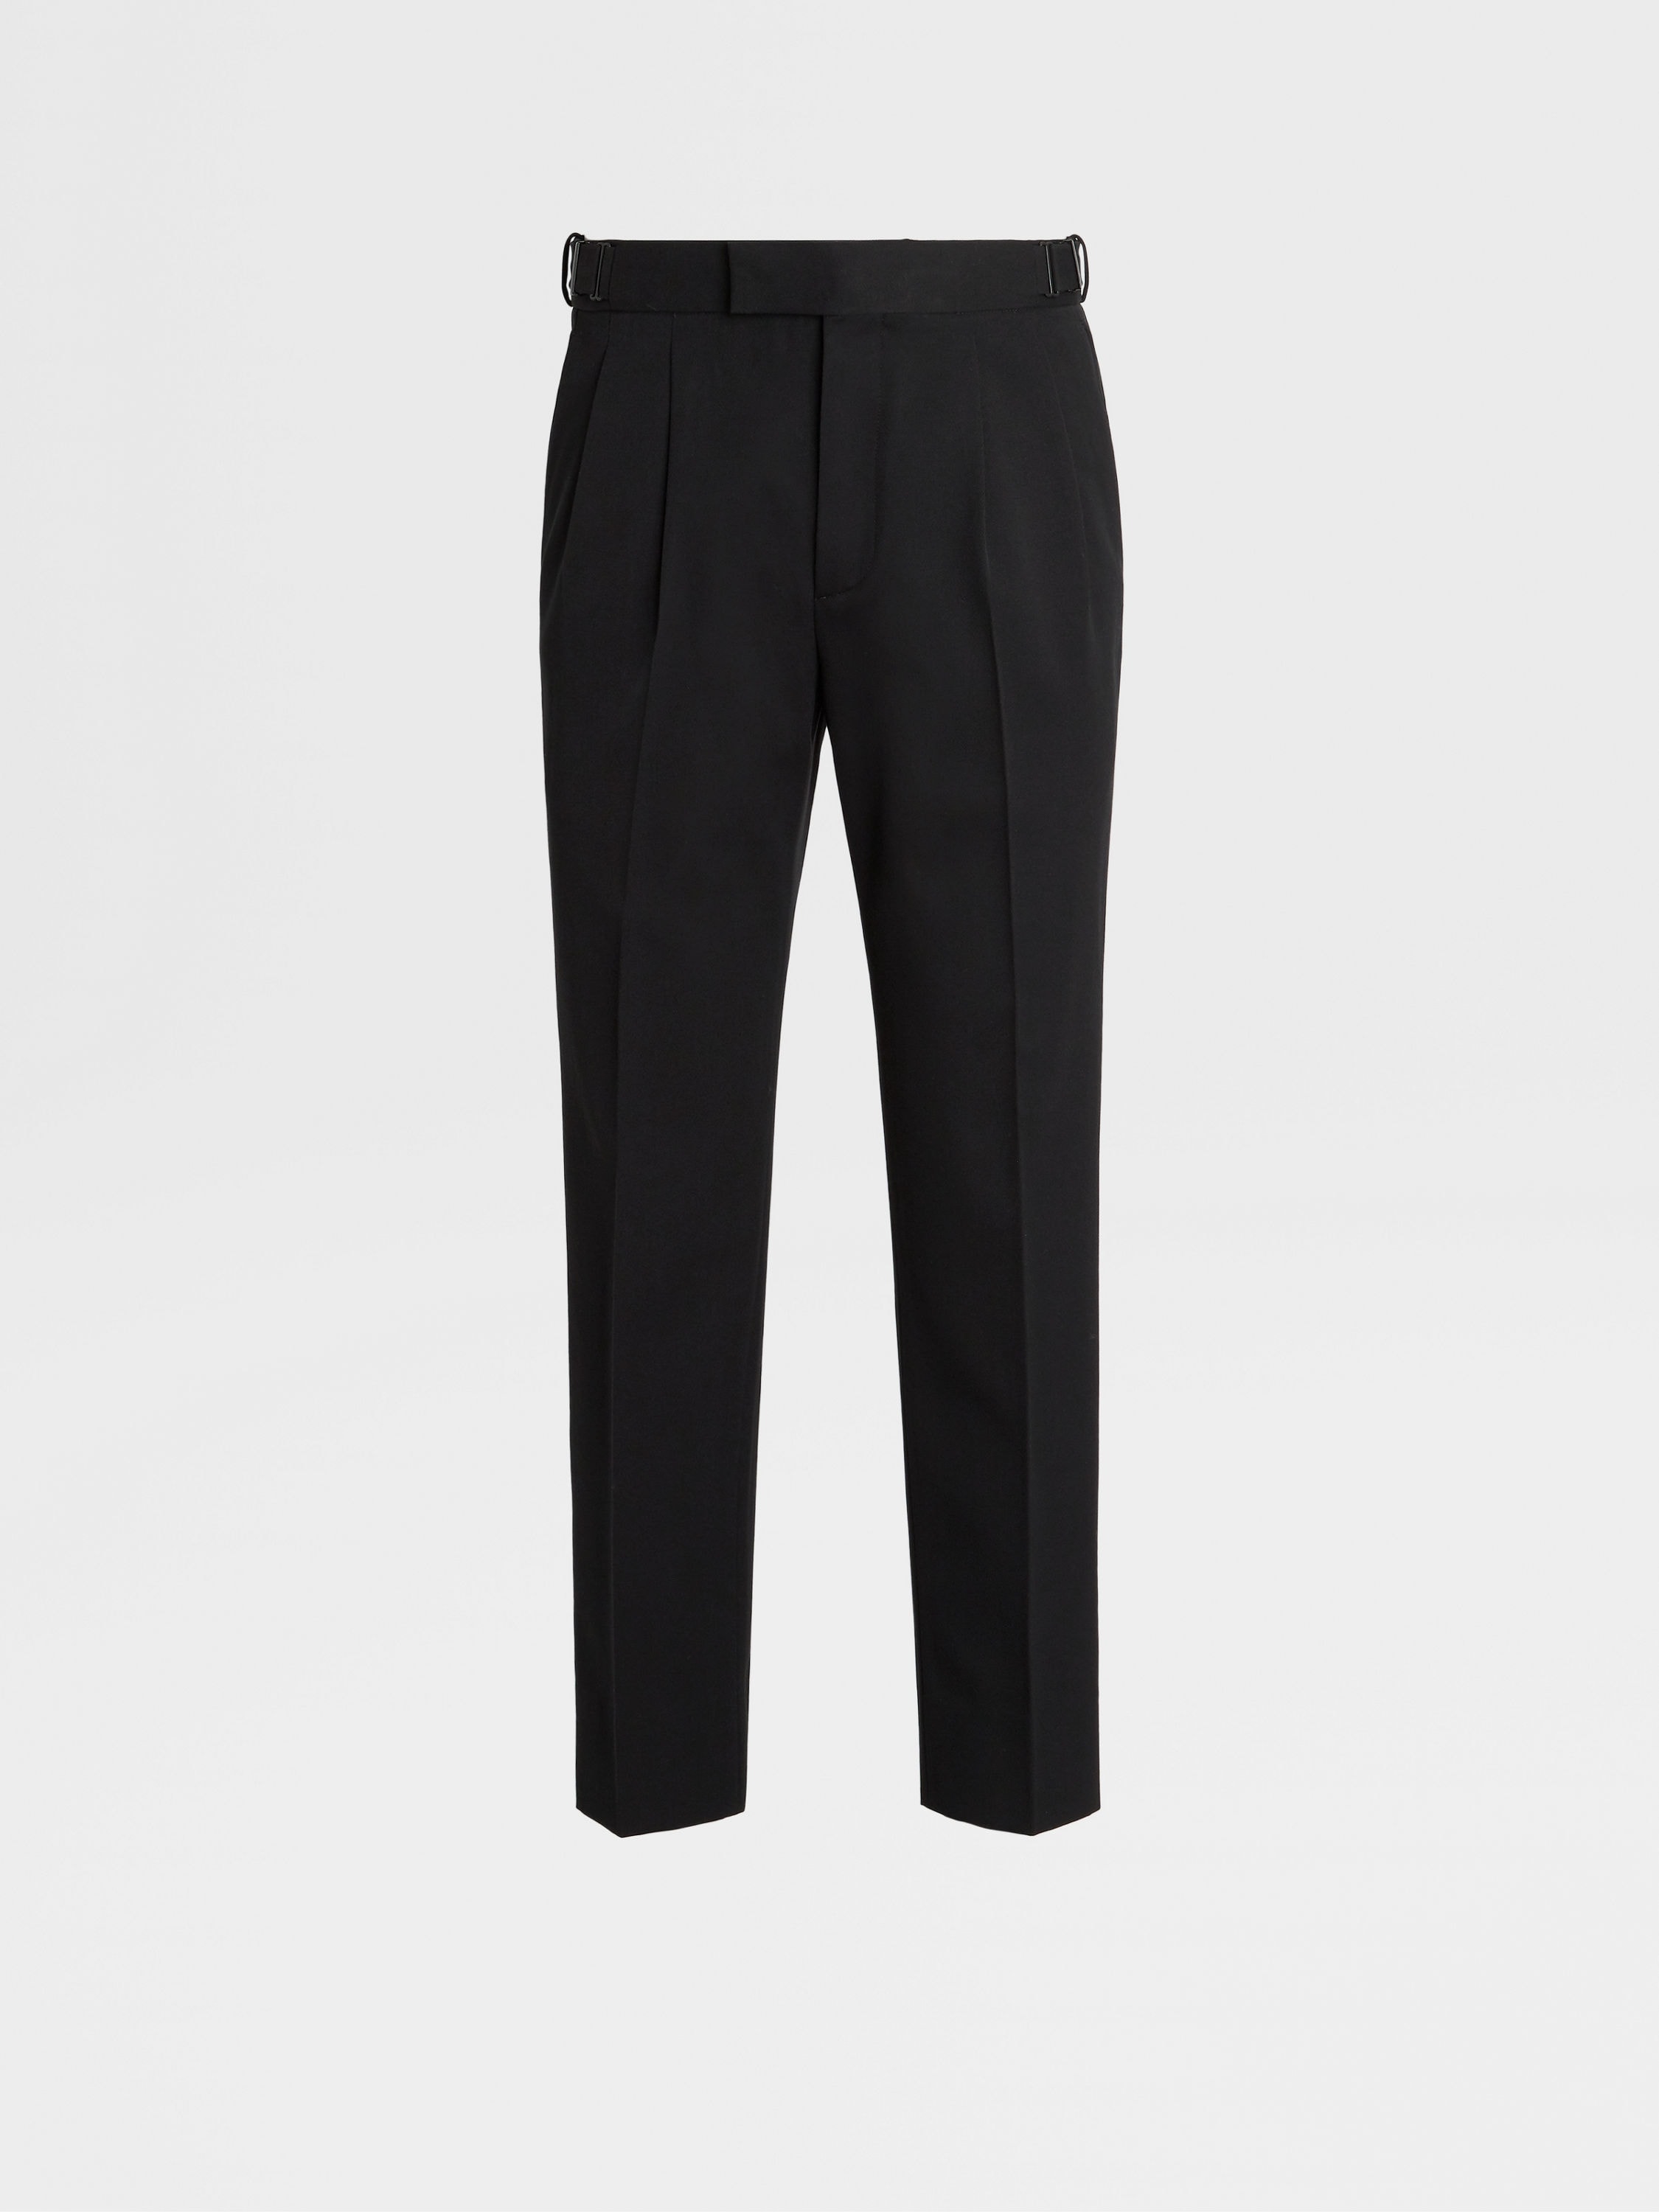 Black Cotton and Wool Pants